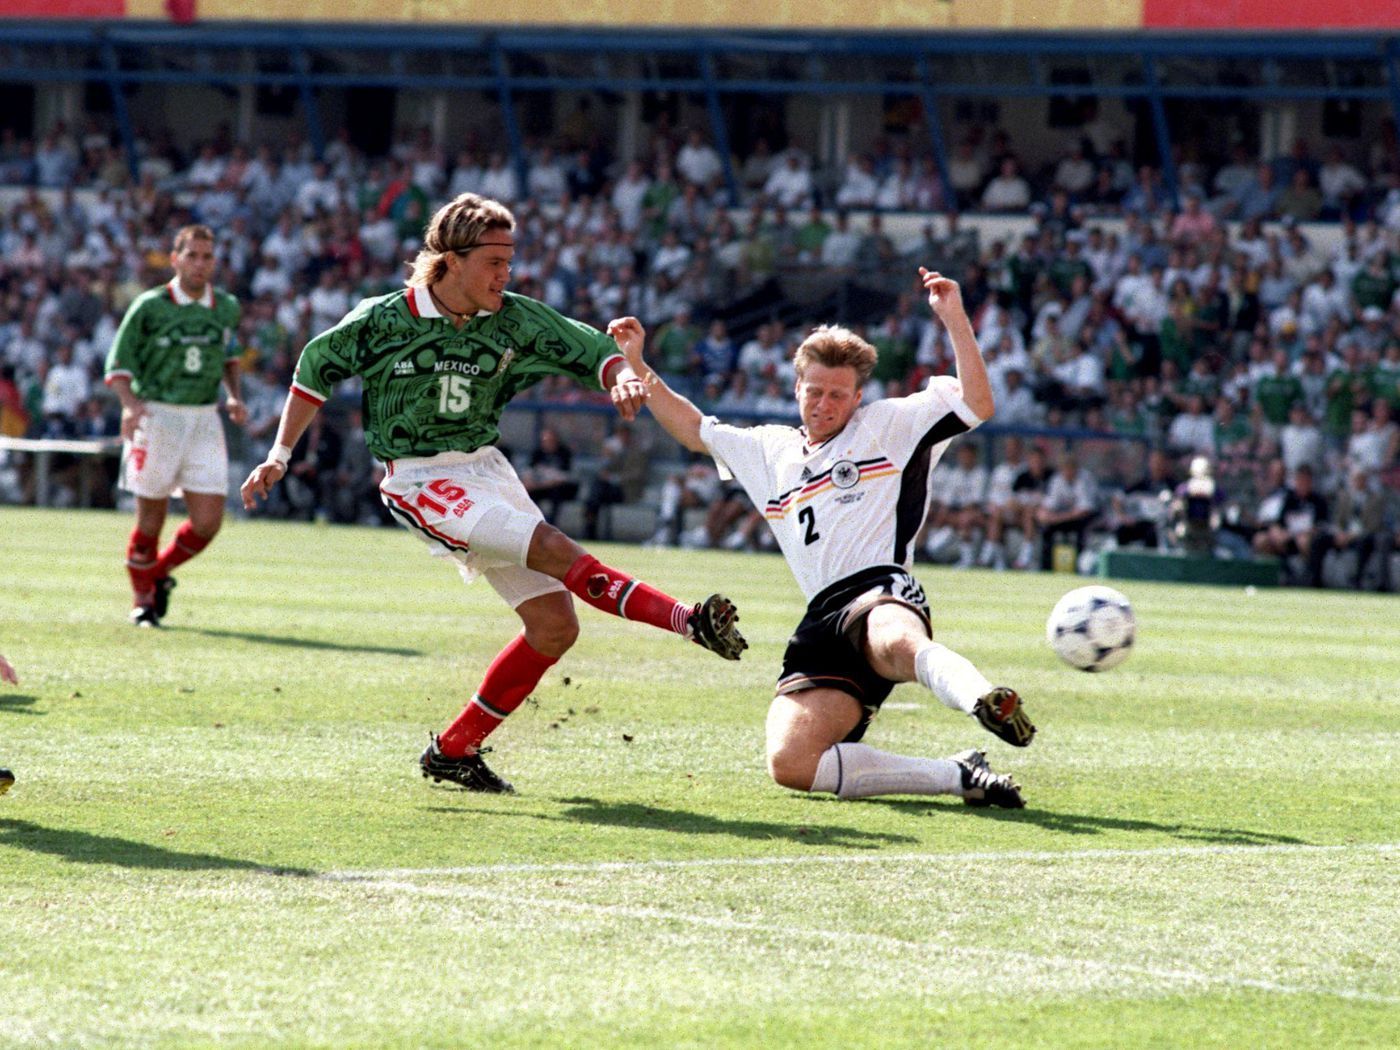 WHAT IF: Luis Hernandez converted second goal vs. Germany in '98 WC? State Of Mind